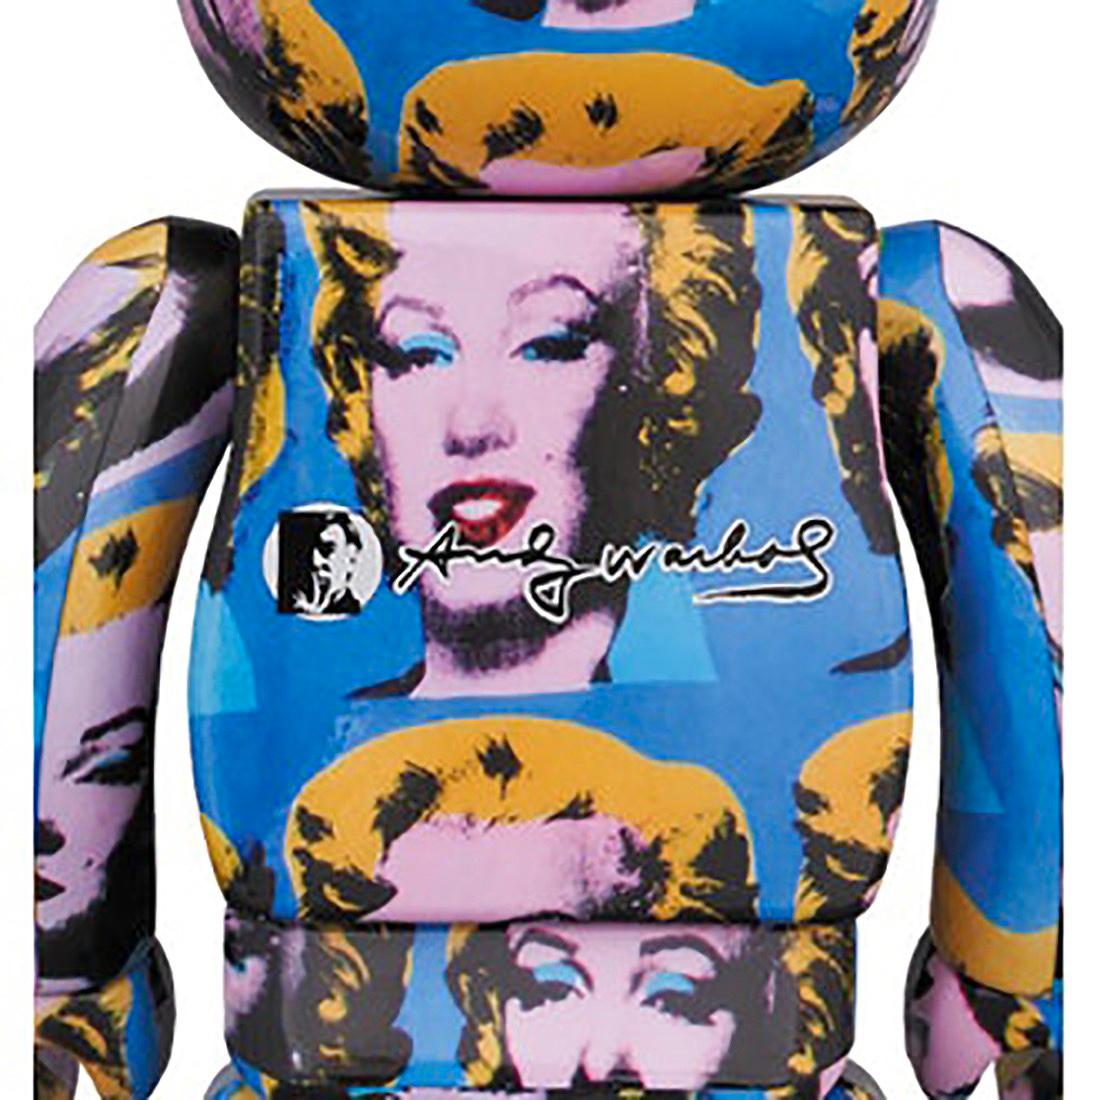 Andy Warhol Marilyn Bearbrick 400% Companion (Warhol BE@RBRICK 400%) - Pop Art Sculpture by (after) Andy Warhol